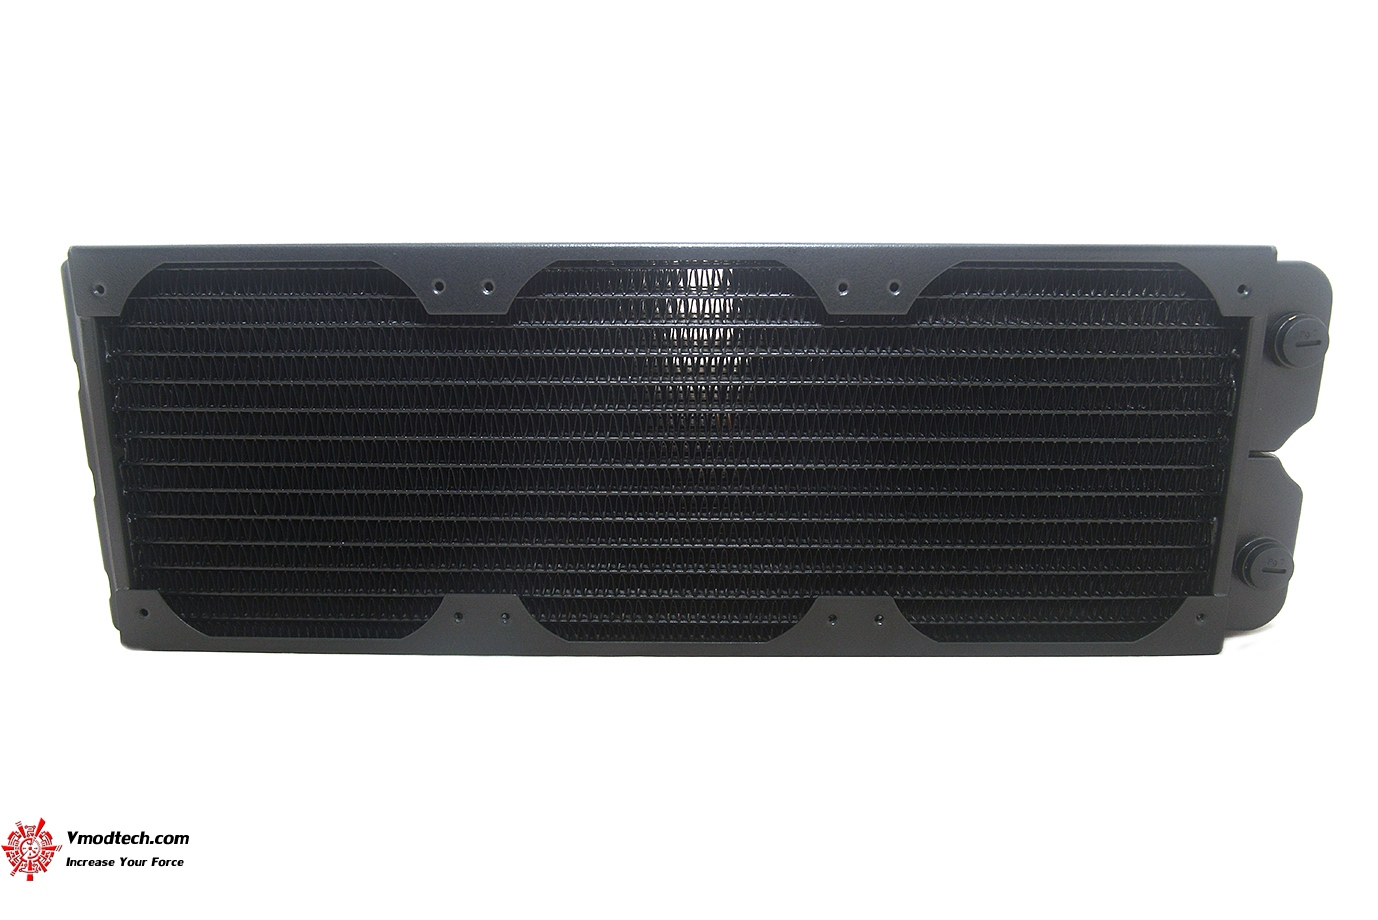 dsc 7696 Thermaltake Pacific CL360 Radiator Review